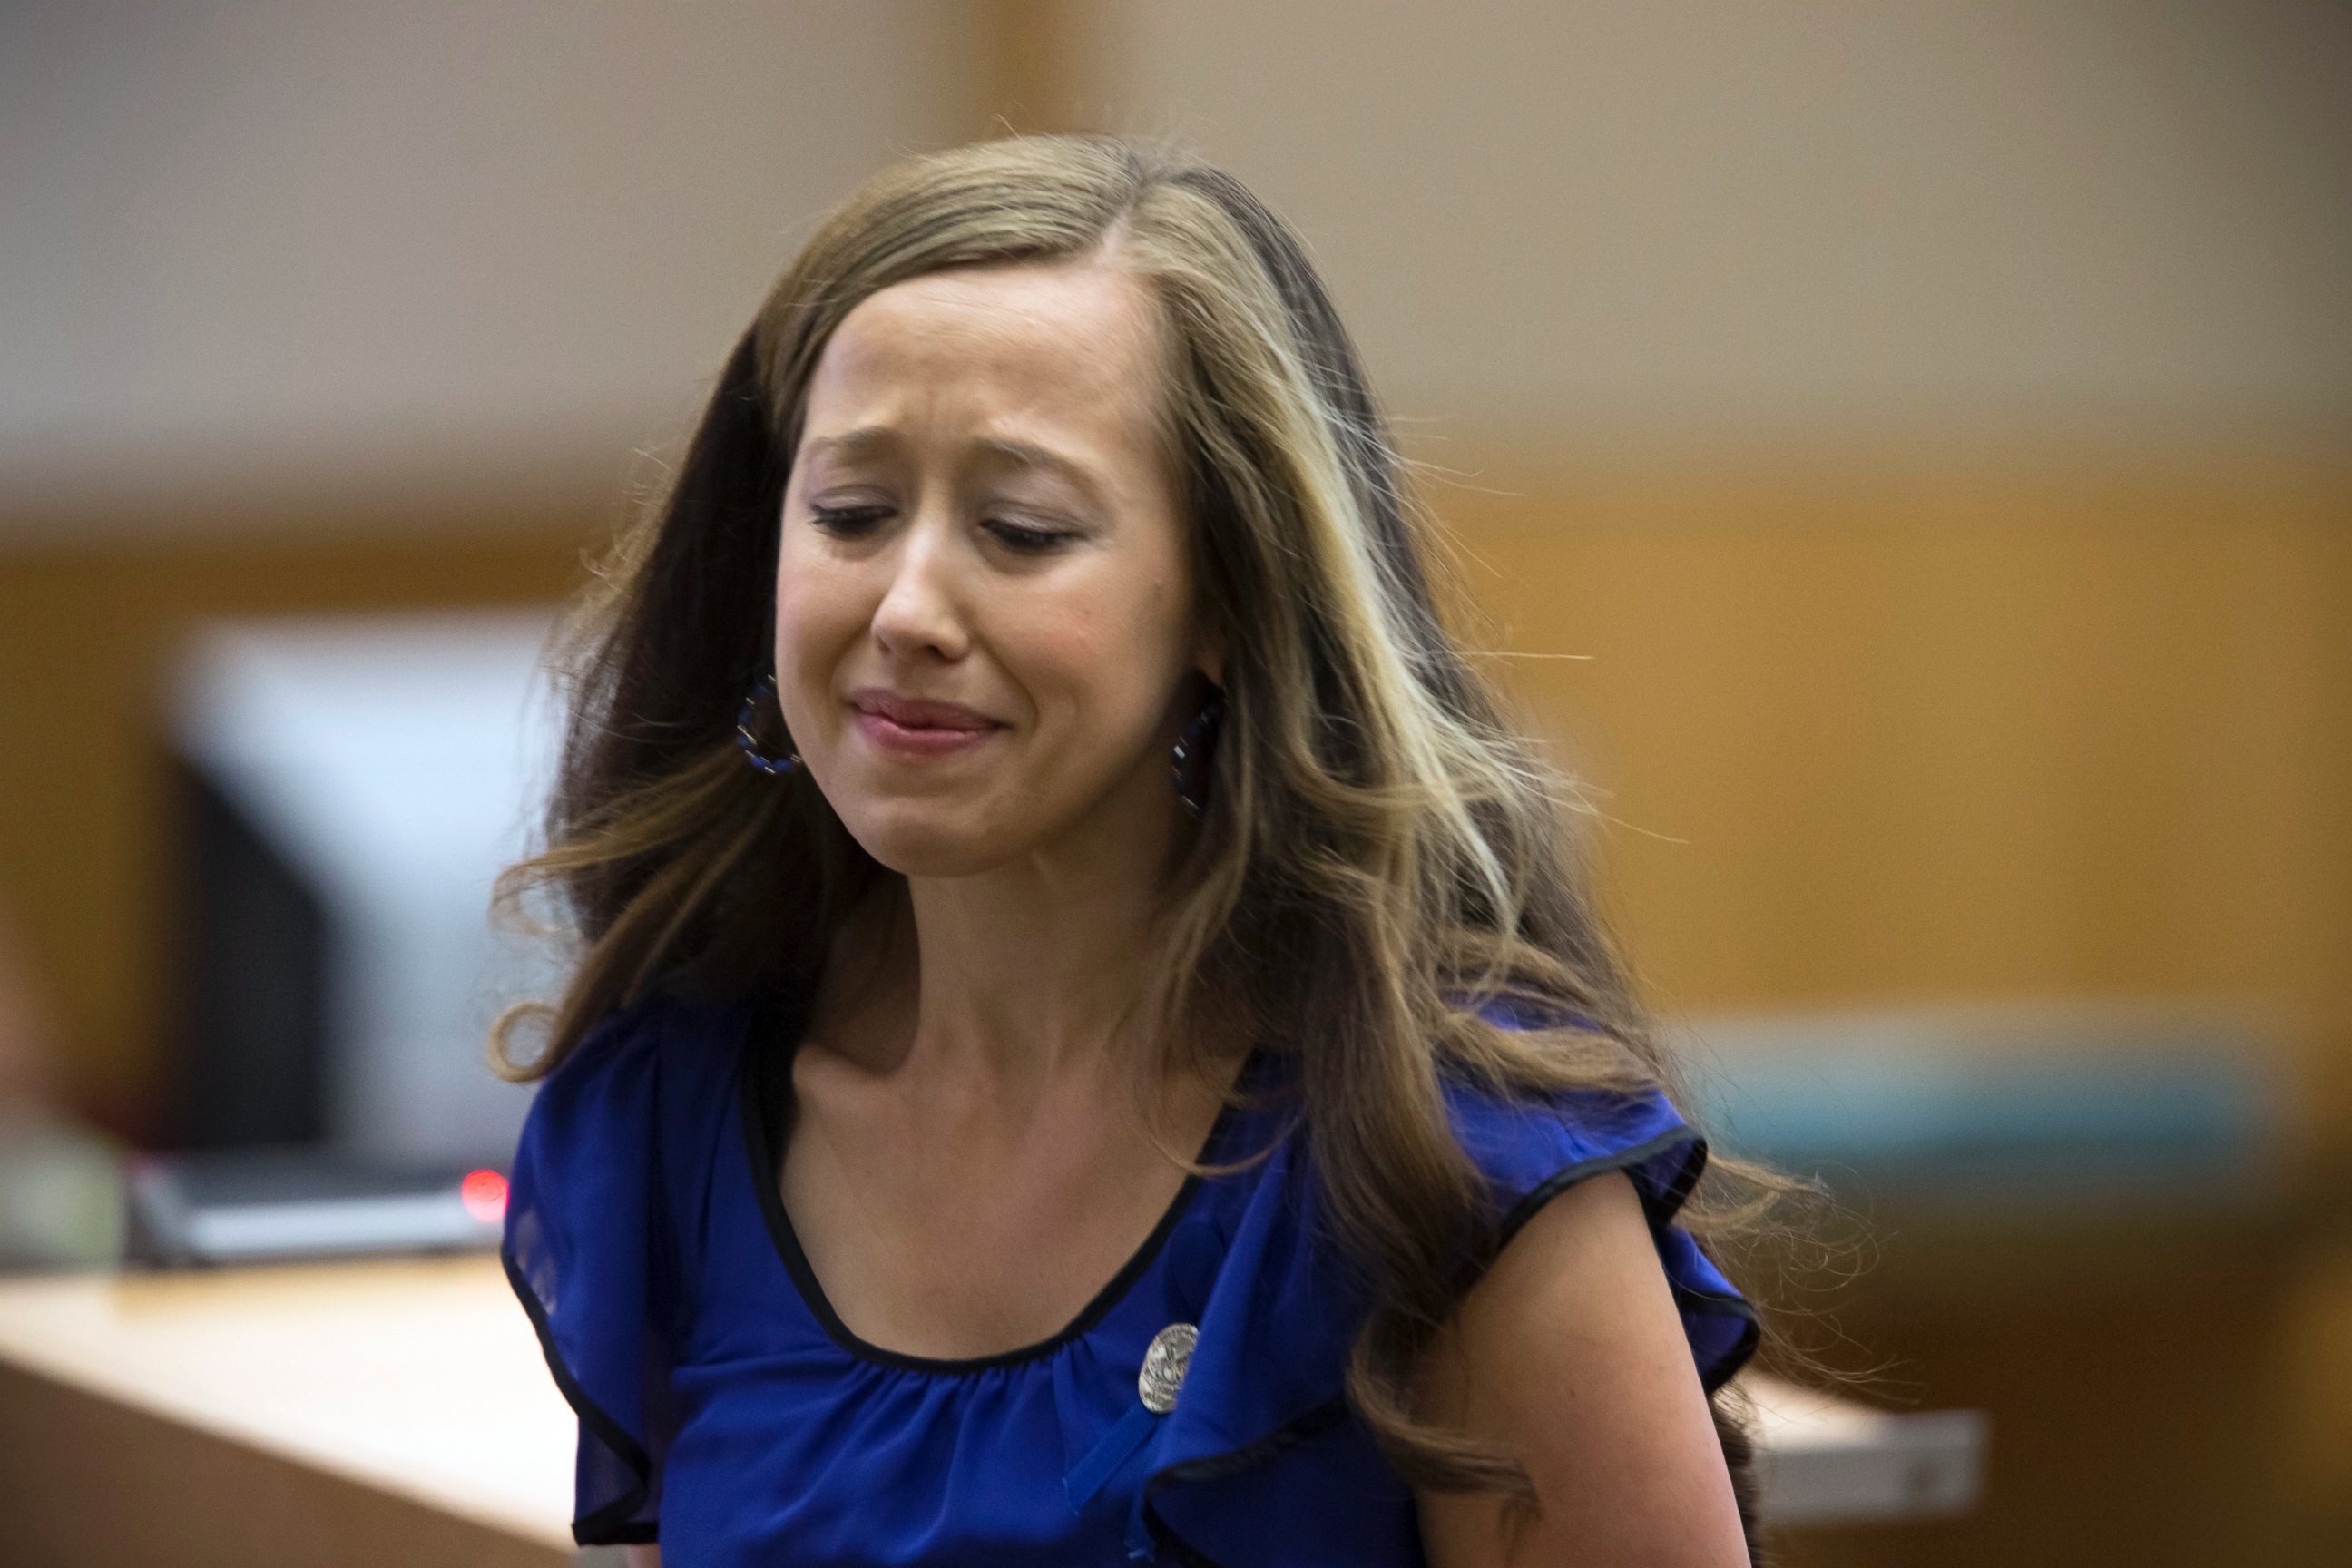 PHOTO: Hillary Wilcox, a sister of Travis Alexander, makes a statement during the sentencing of Jodi Arias in Maricopa County Superior Court, April 13, 2015, in Phoenix.